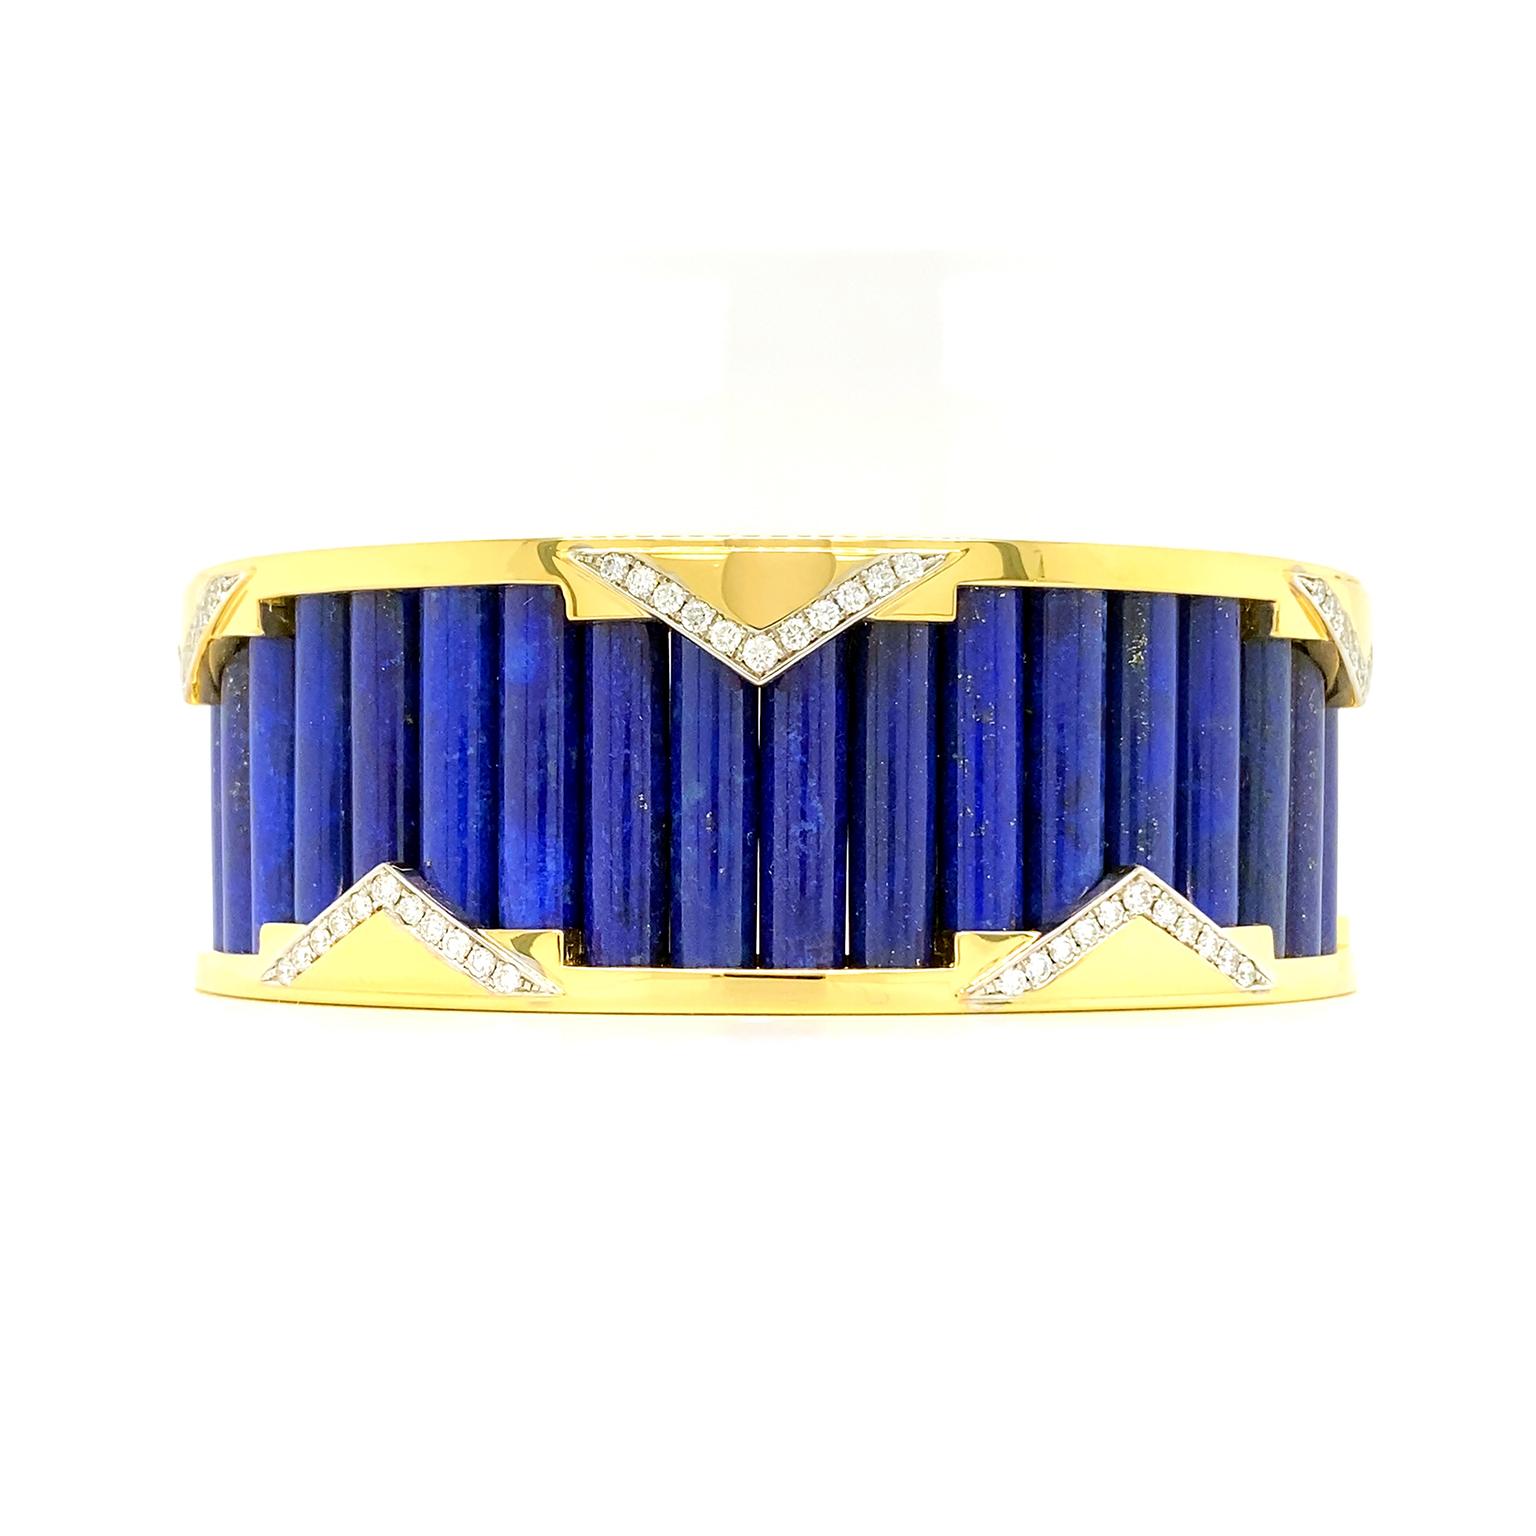 Influenced by the splendor motifs of classic Art Deco, this bracelet features an 18k yellow gold cuff with triangular accents. A row of brilliant cut diamonds produces a radiant glow while tracing the edges of each geometric pattern. The cuff frames